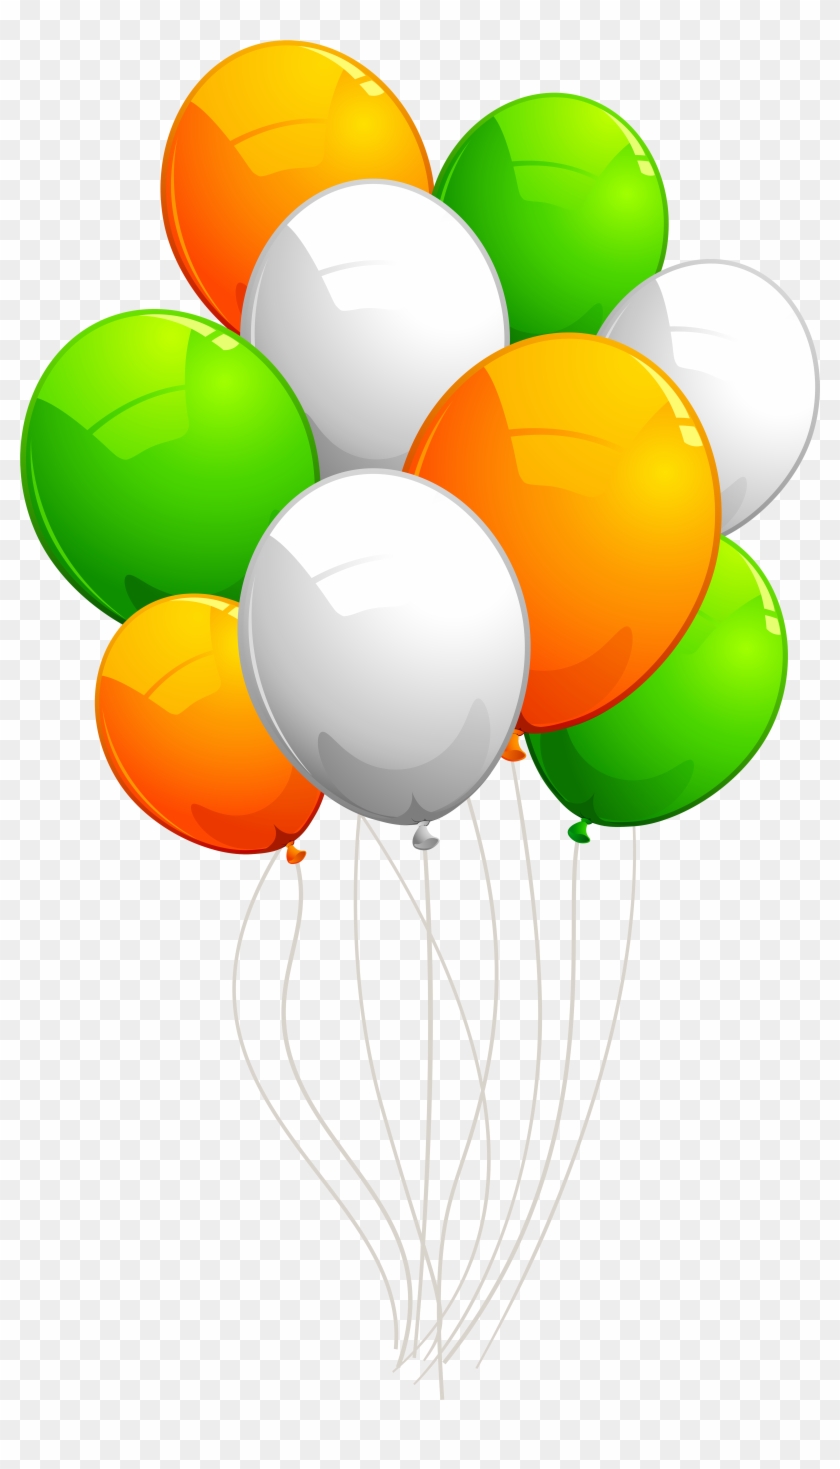 Irish Balloons Transparent Png Image - Orange And Green Balloons Png Clipart #2240832